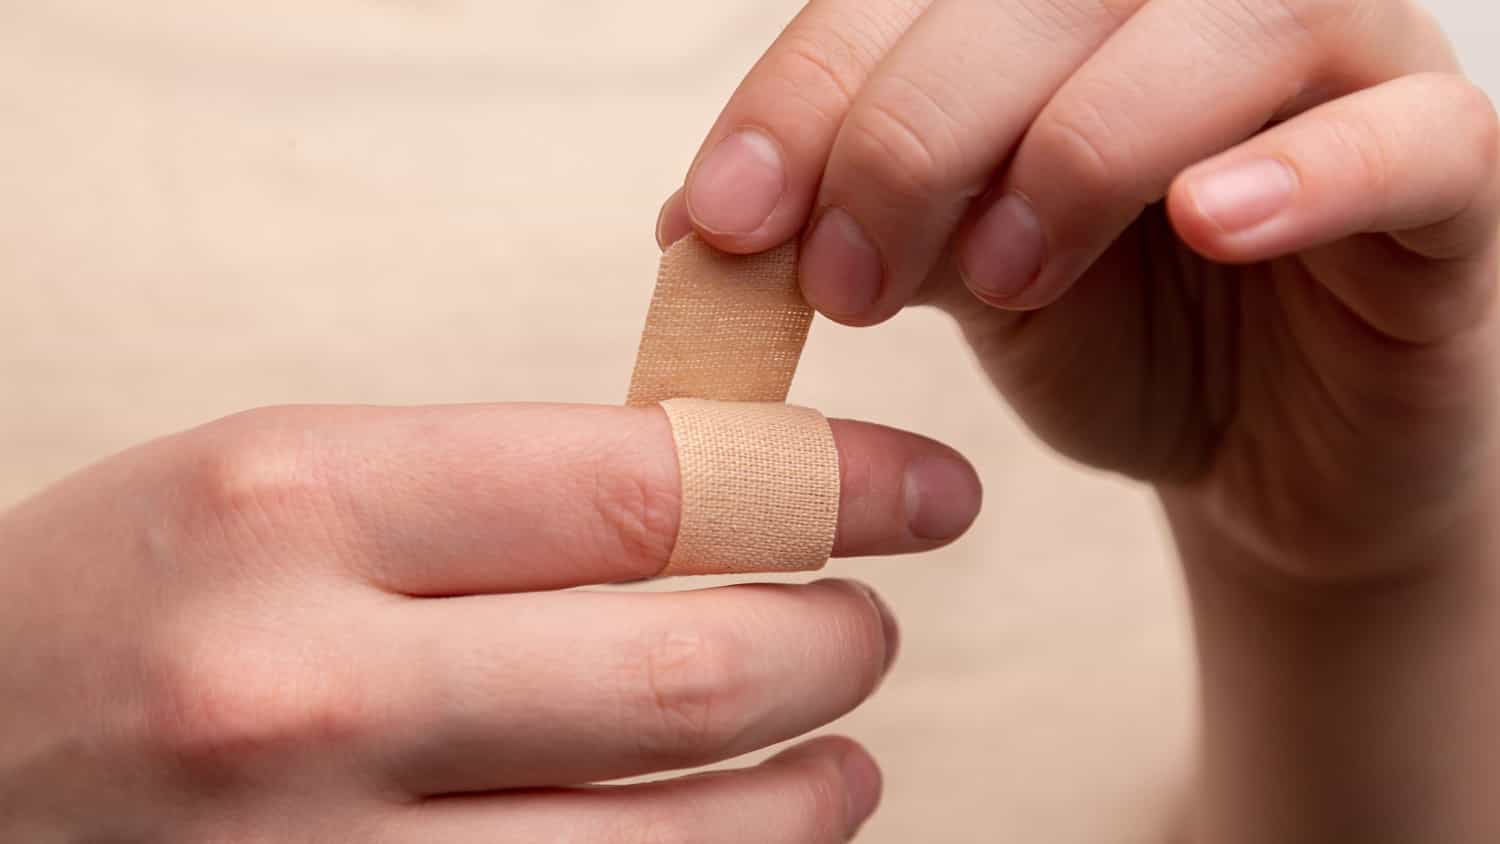 person wrapping bandage around finger